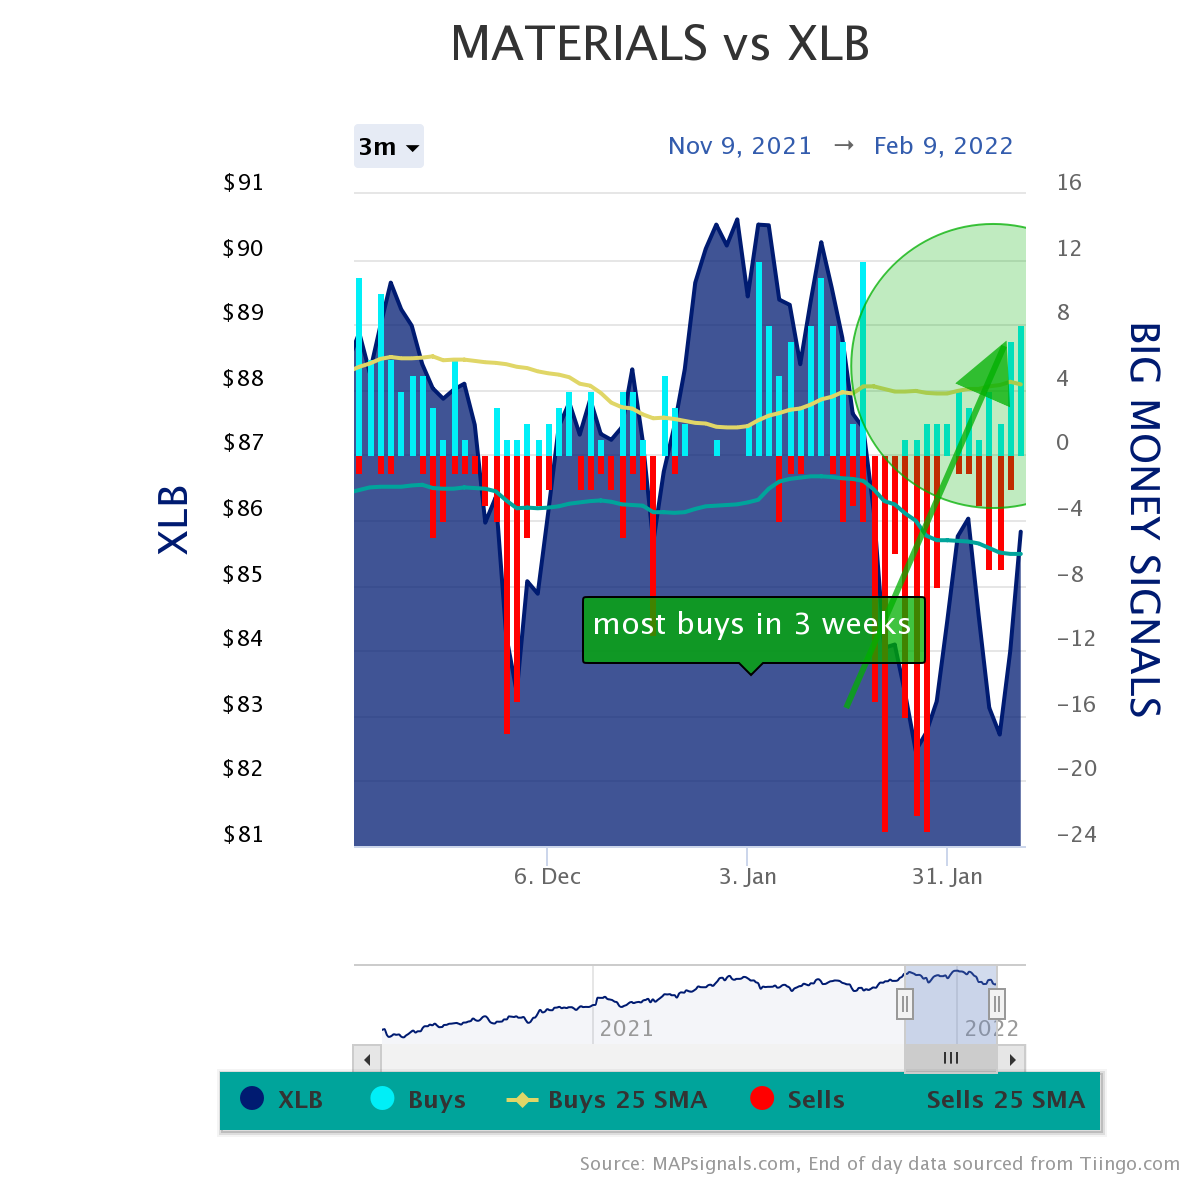 Materials vs XLB | MOST BUYS IN 3 WEEKS